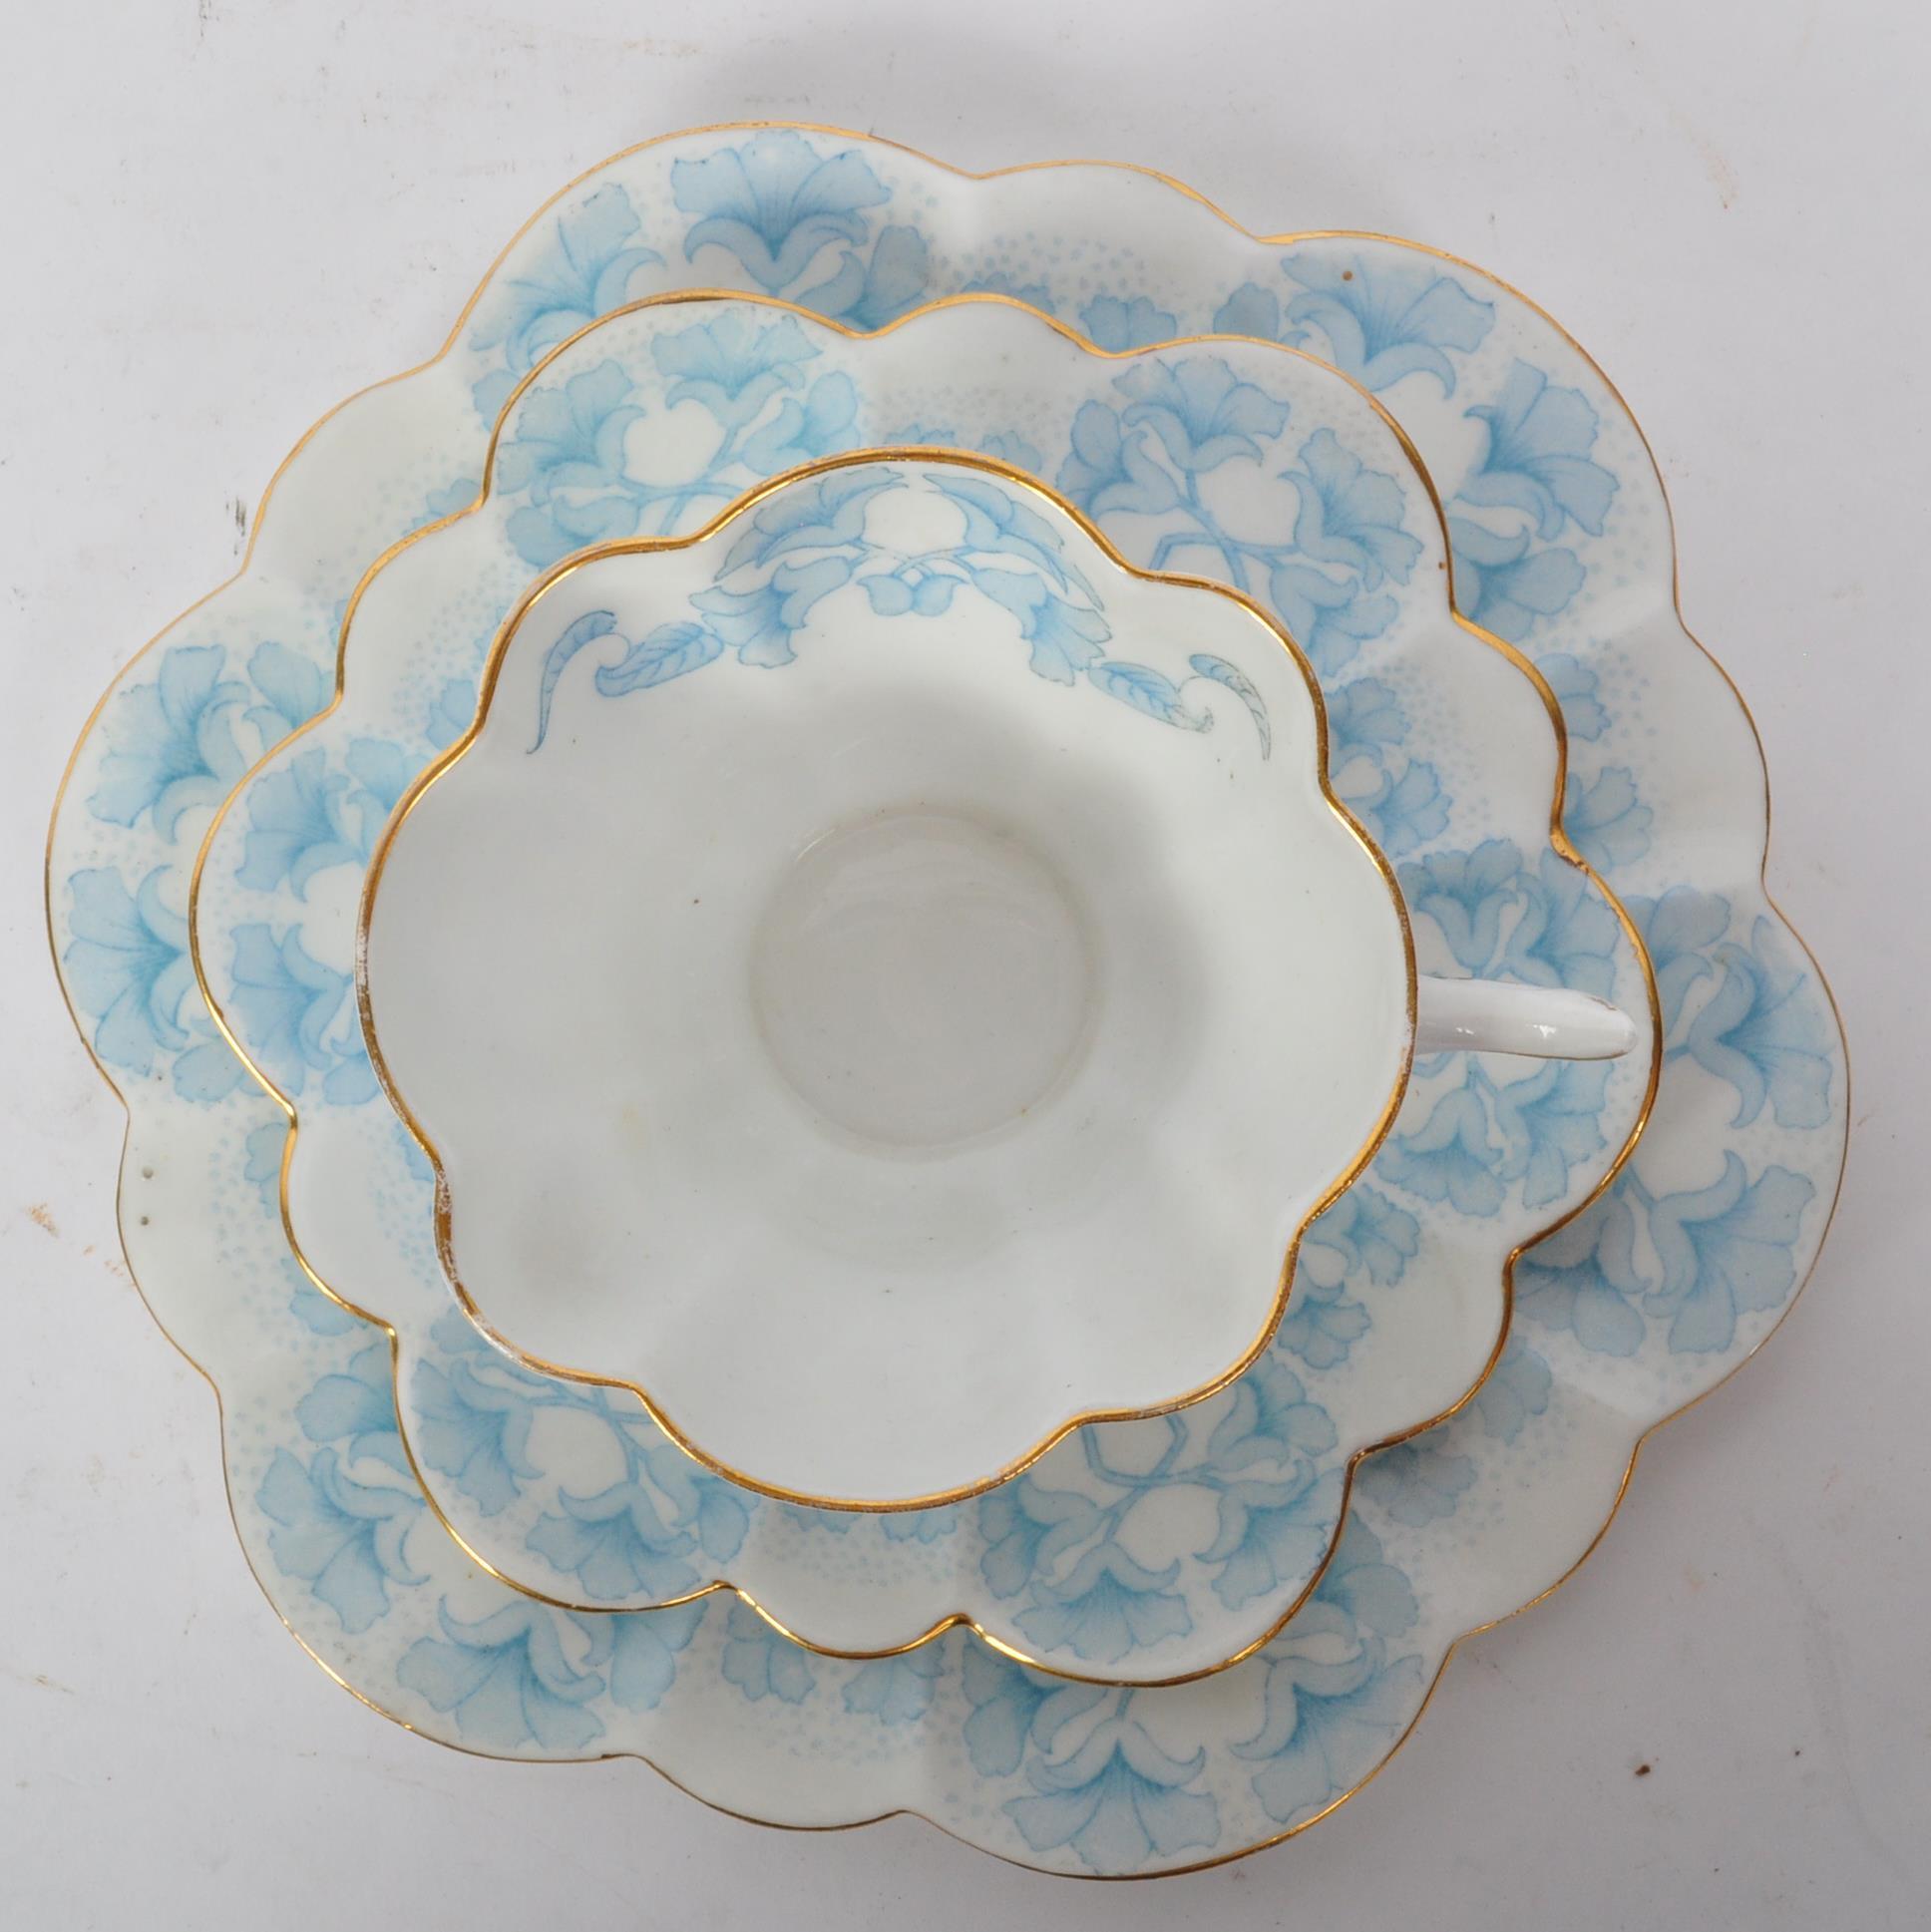 WILEMAN & CO SHELLEY BONE CHINA TEACUP & SAUCER TRIO - BLUE SNOWDROP - Image 5 of 6